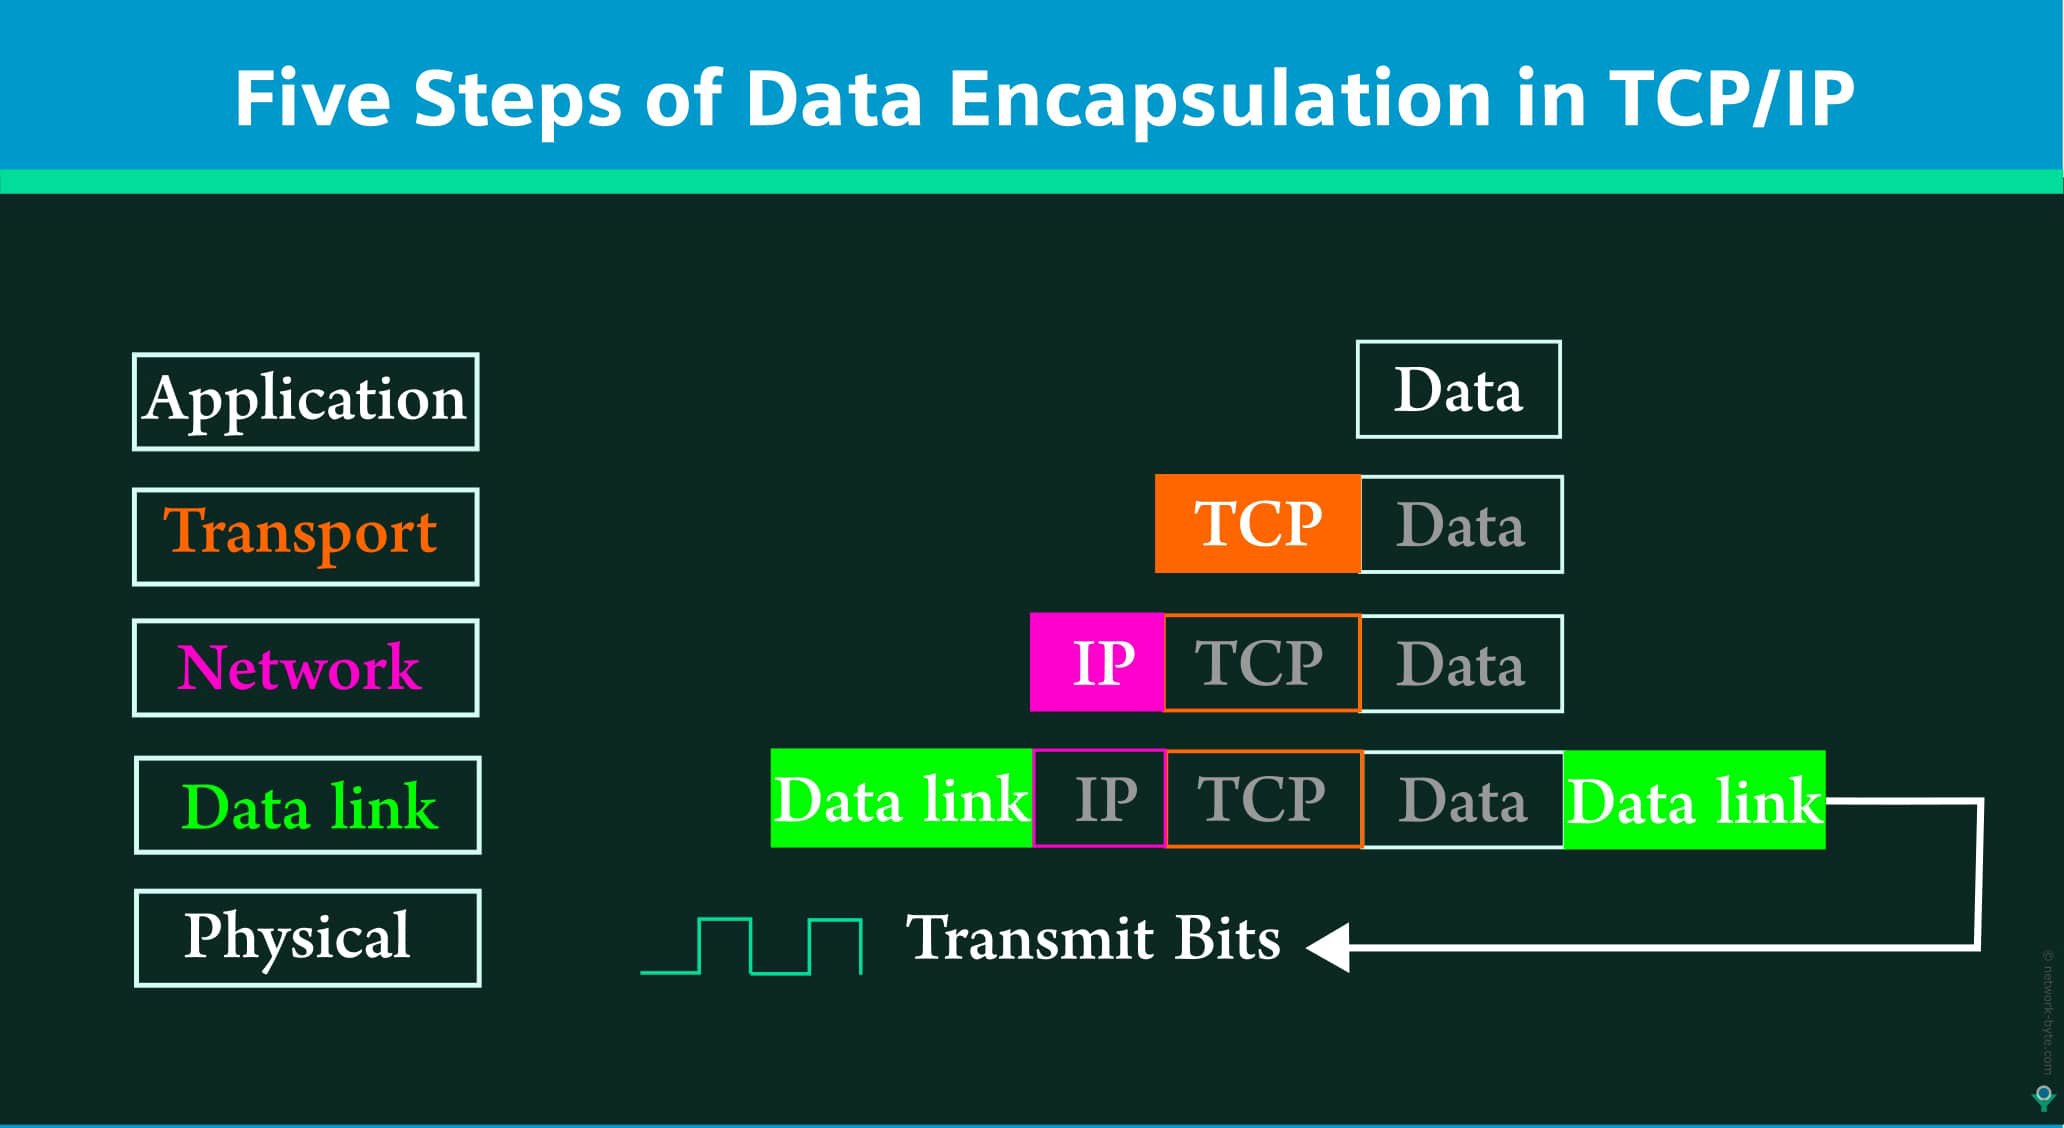 Encapsulation and Decapsulation in tcp/ip